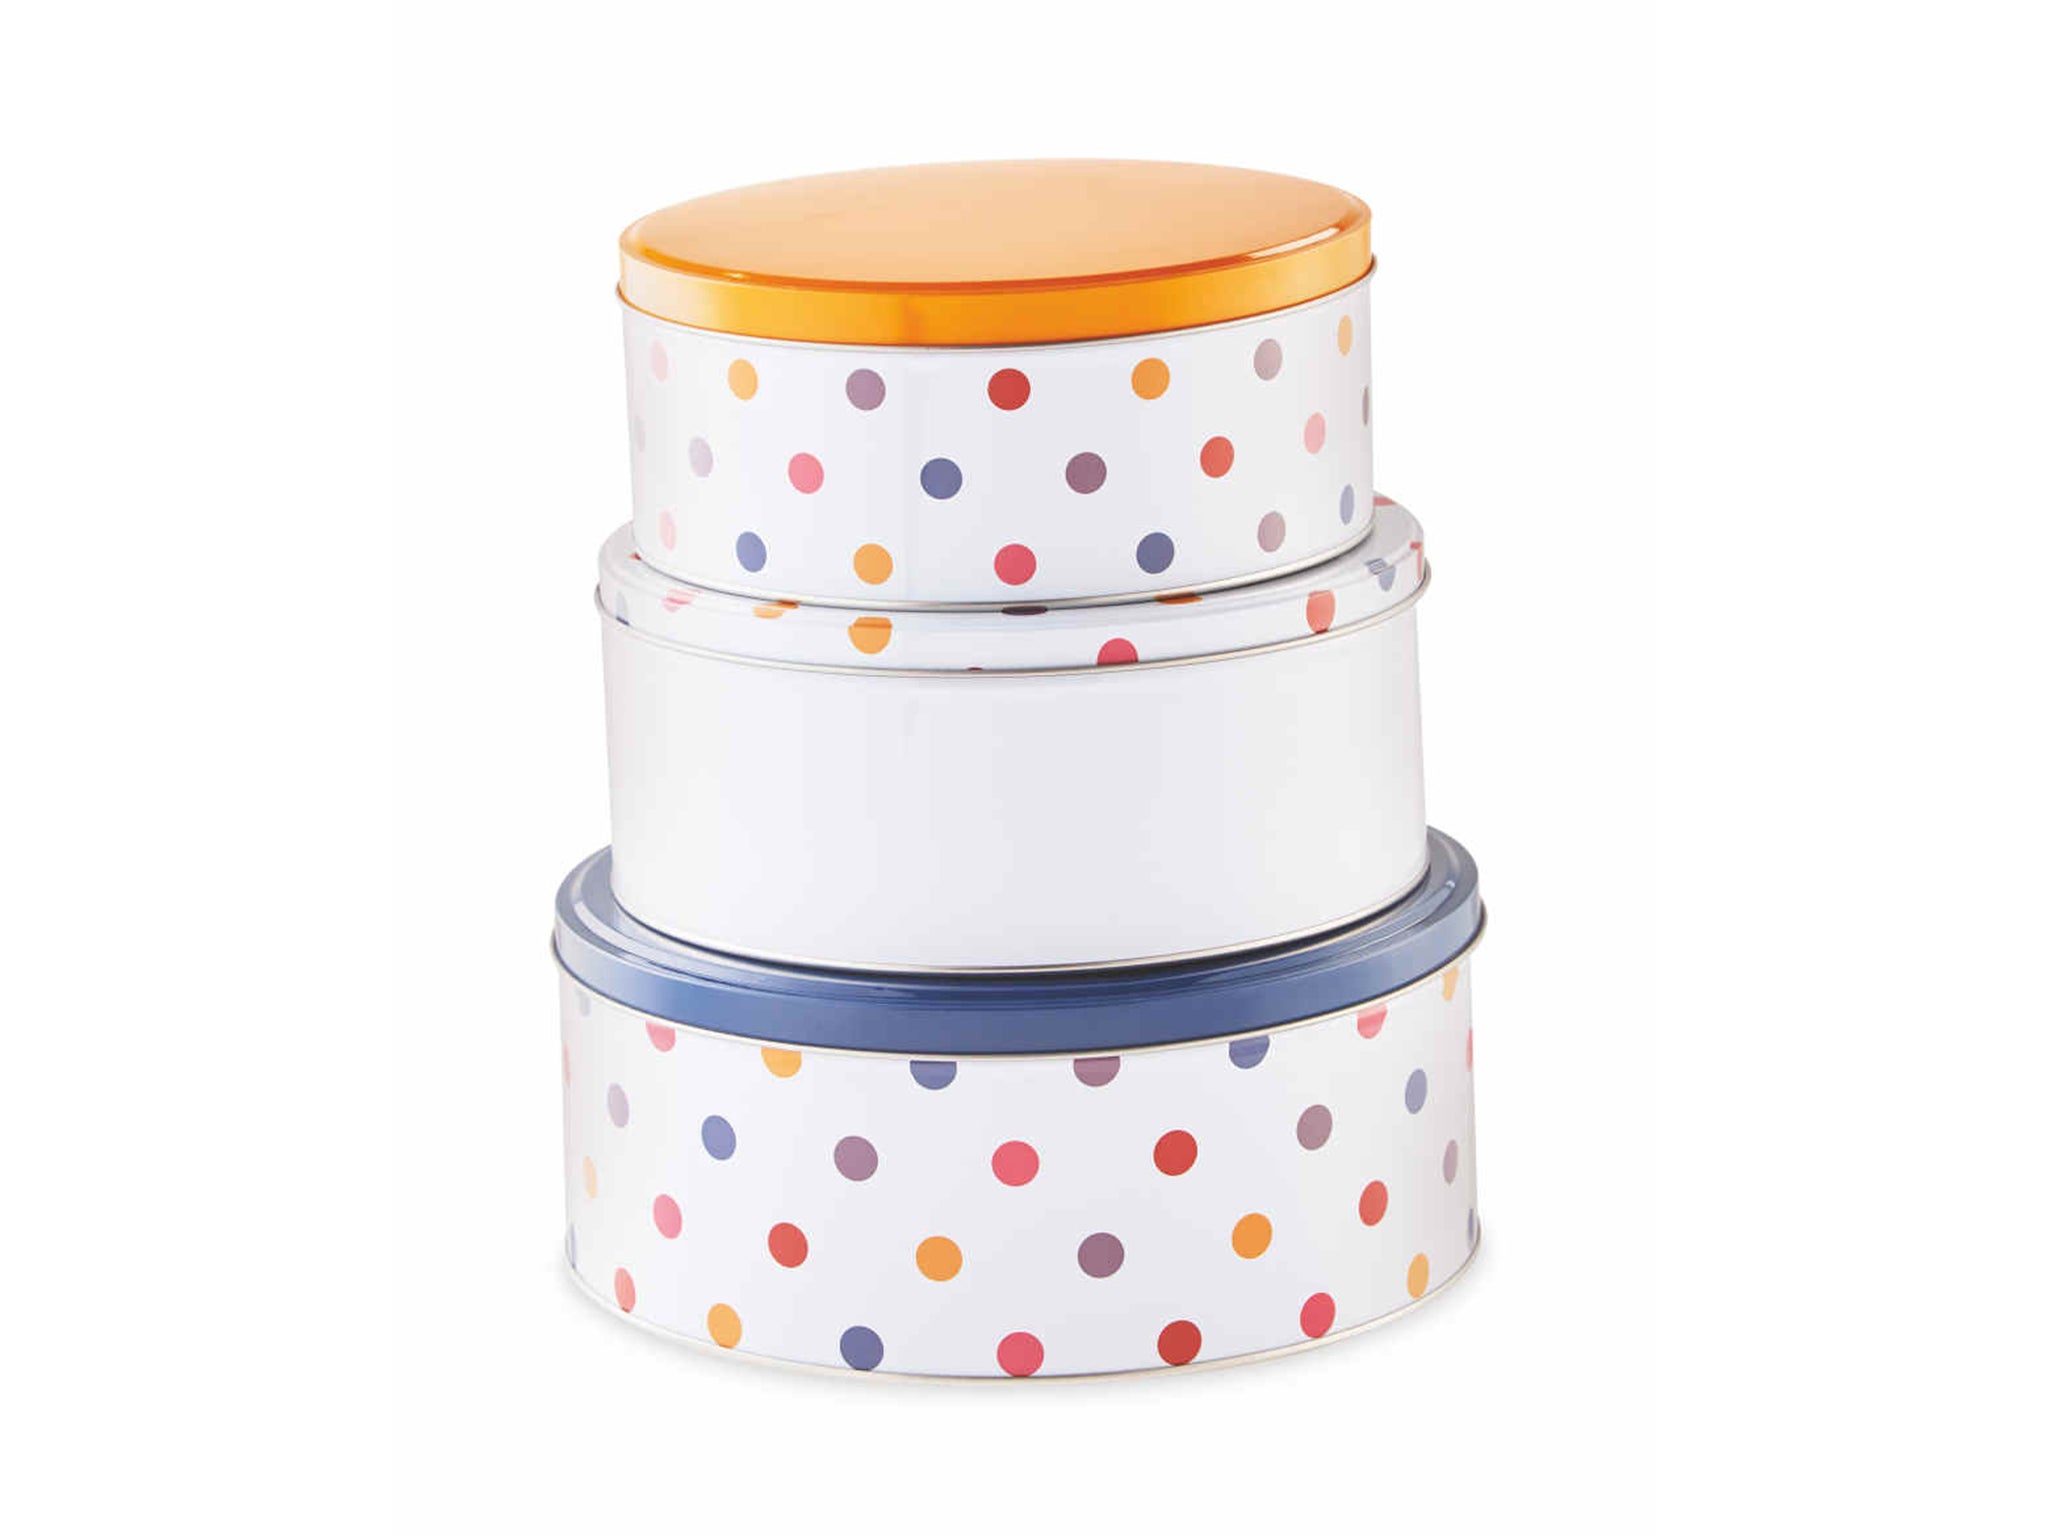 Keep your bakes fresh and ready to eat in these decorative tins